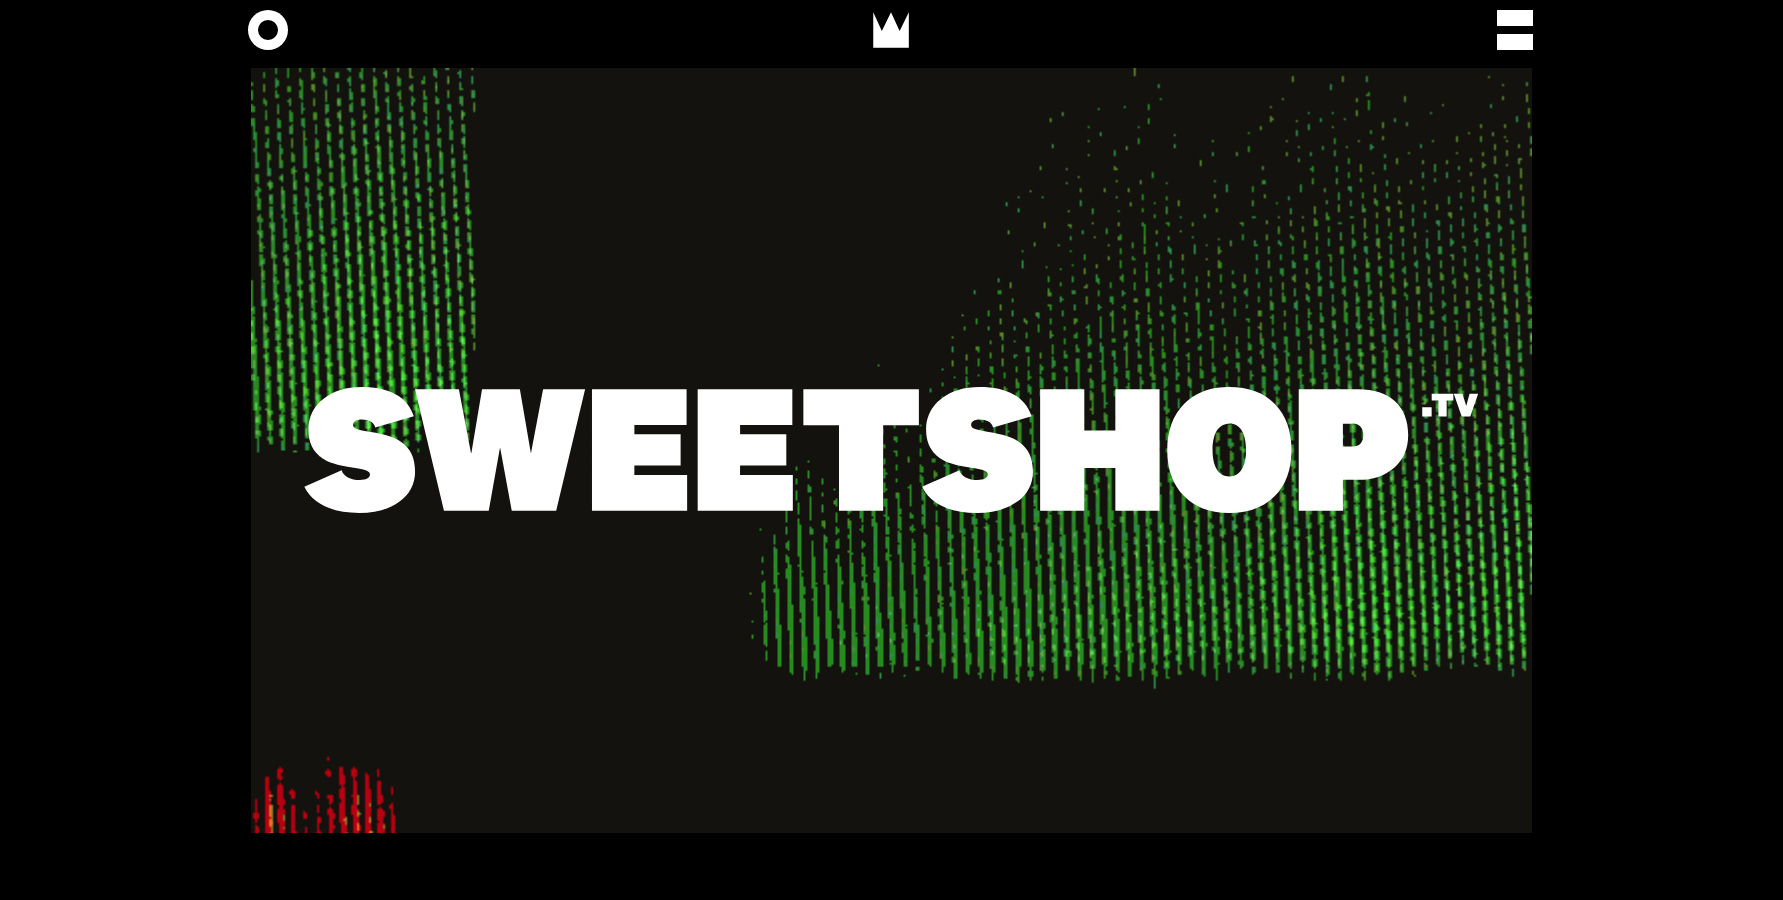 The Sweetshop - Website of the Day